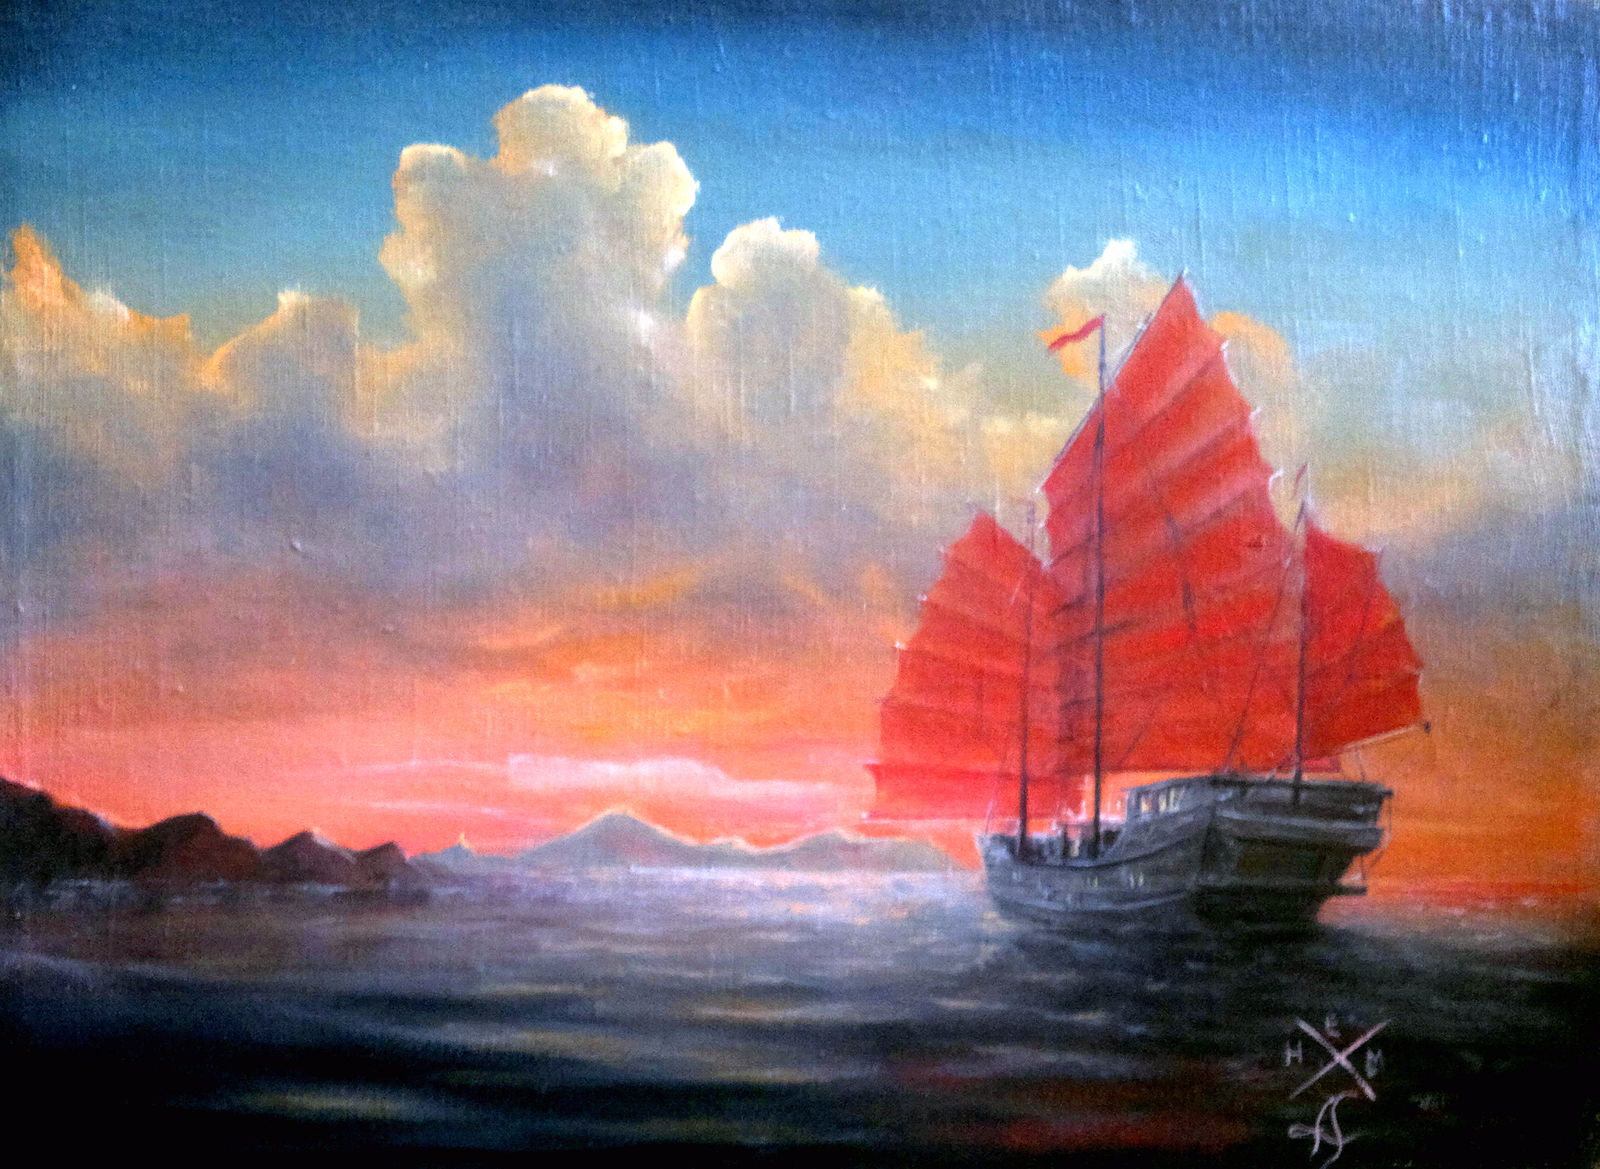 Junk - Sunset, Clouds, Self-taught, Ship, Sea, Oil painting, My